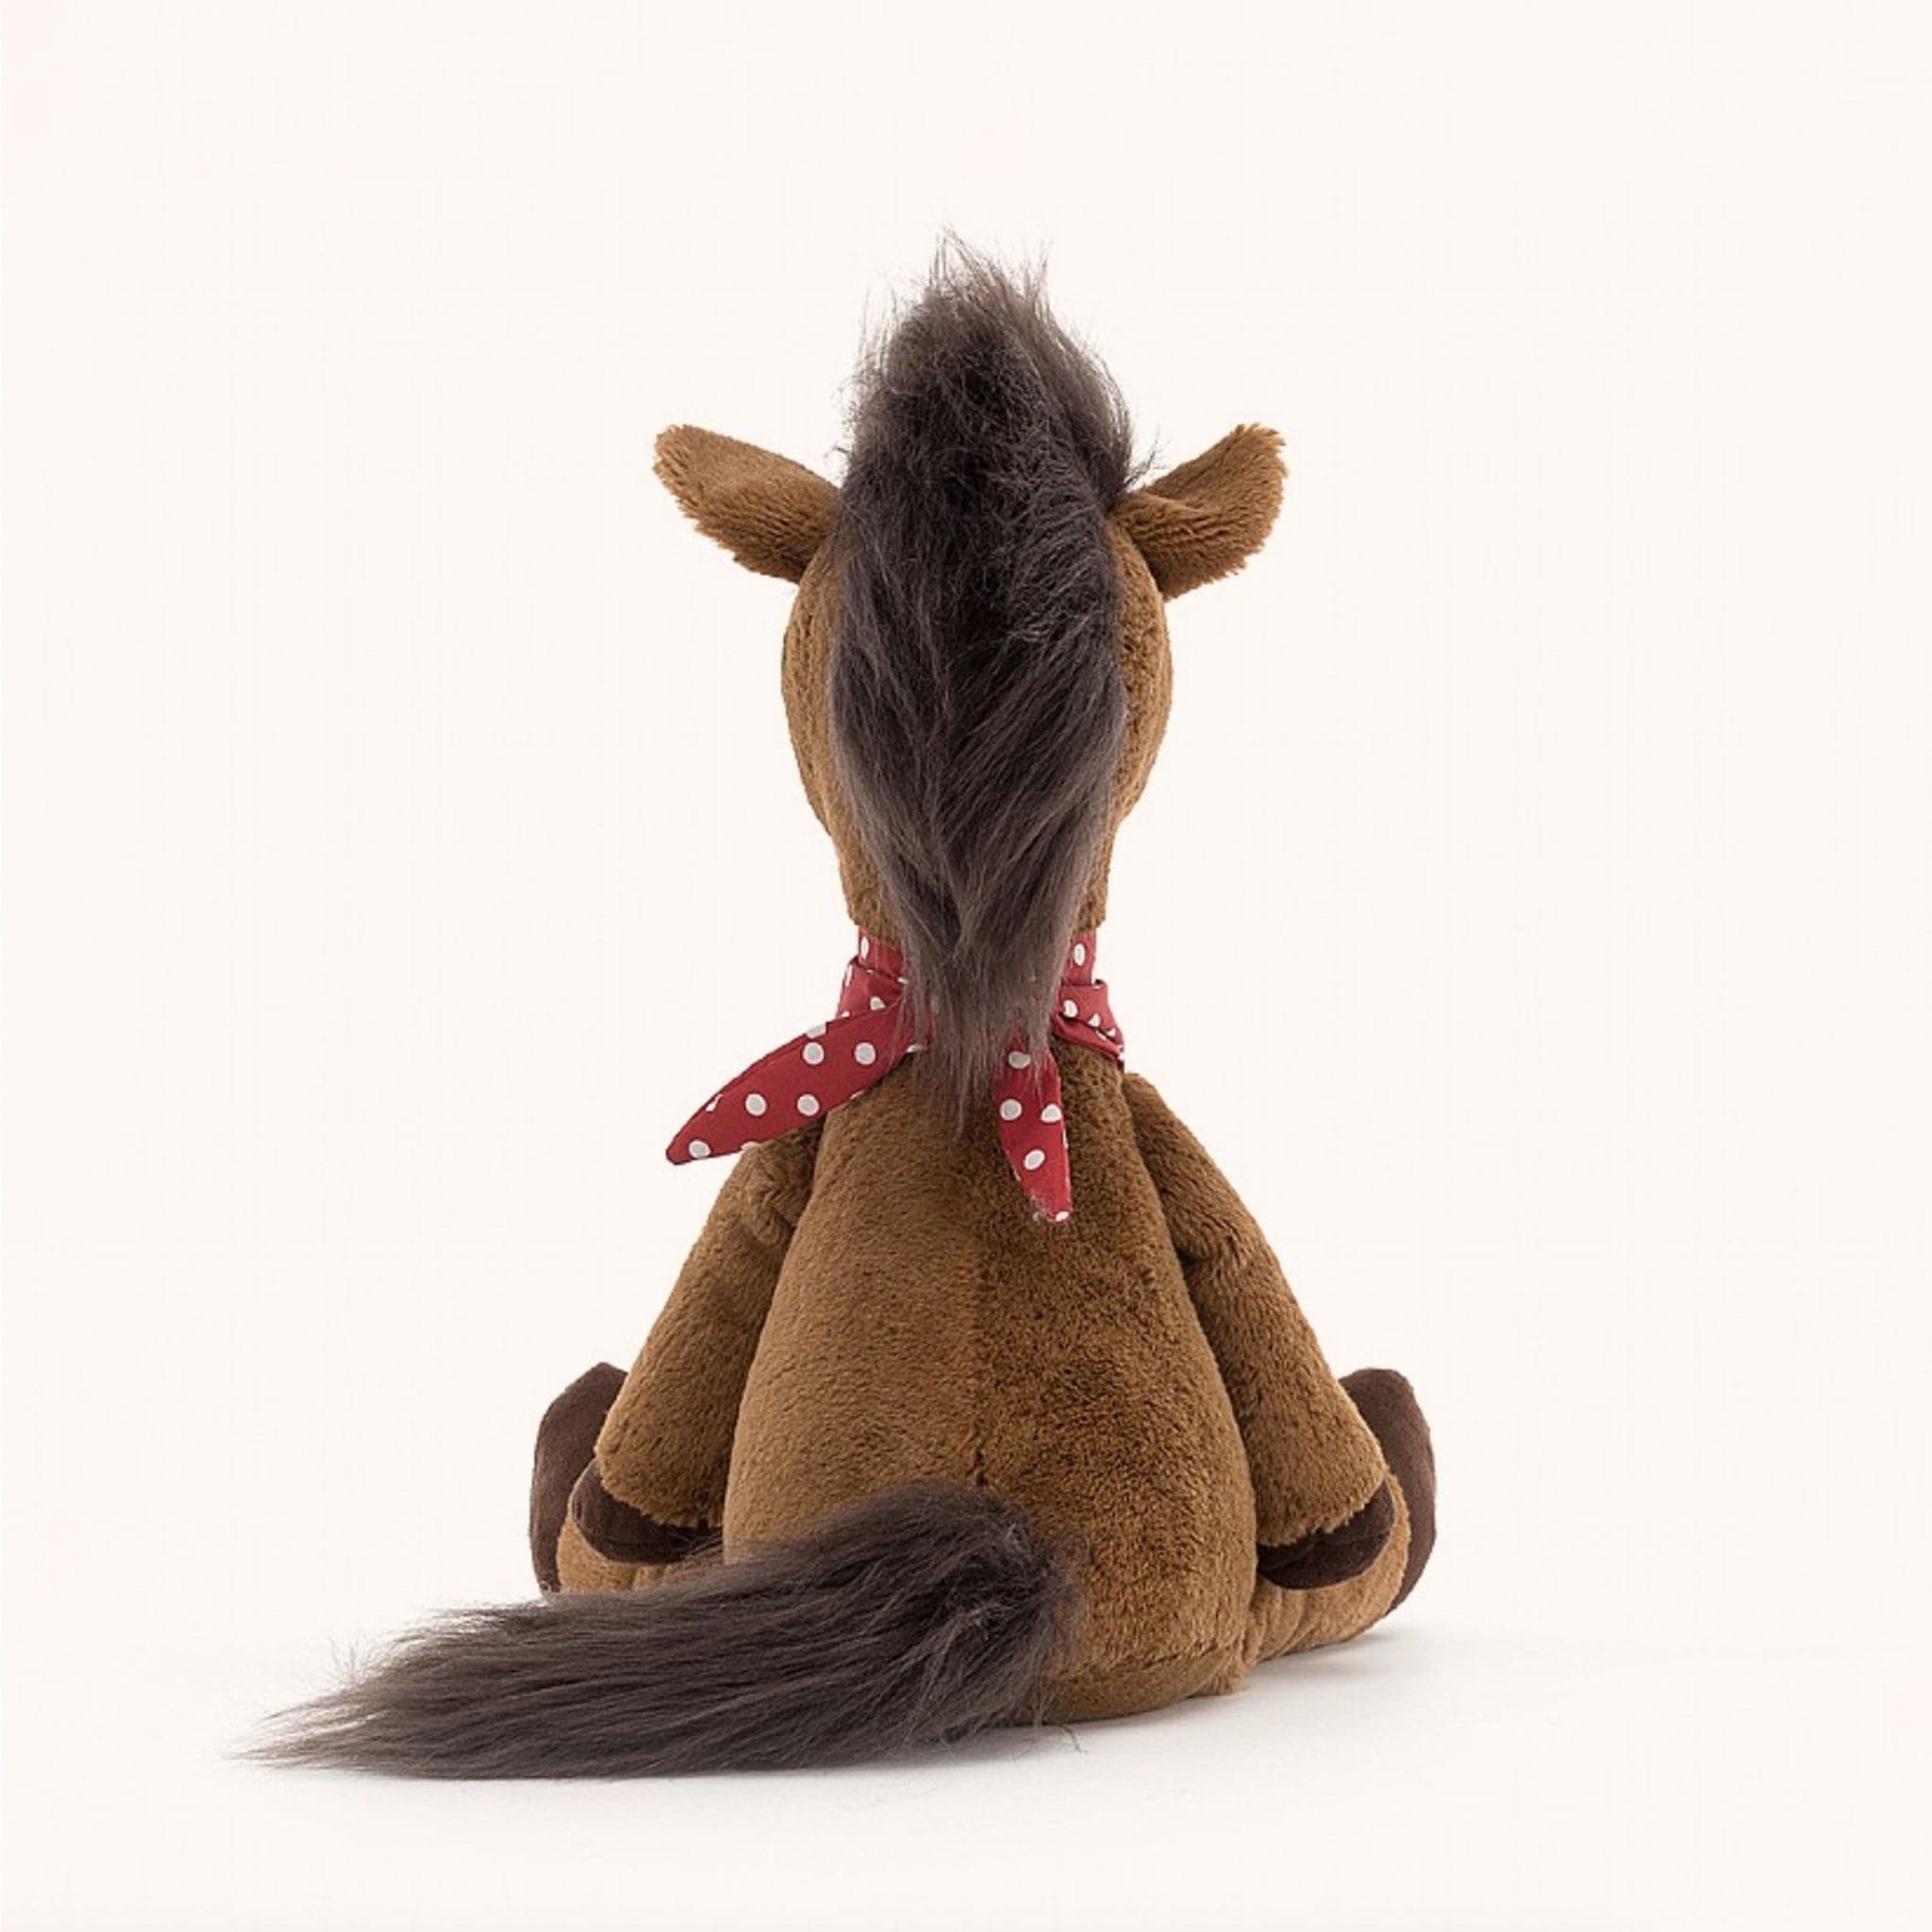 Soft stuffed animal in the shape of a brown horse with fluffy dark brown mane and tail, and wearing a red and white spotted bandana around its neck.